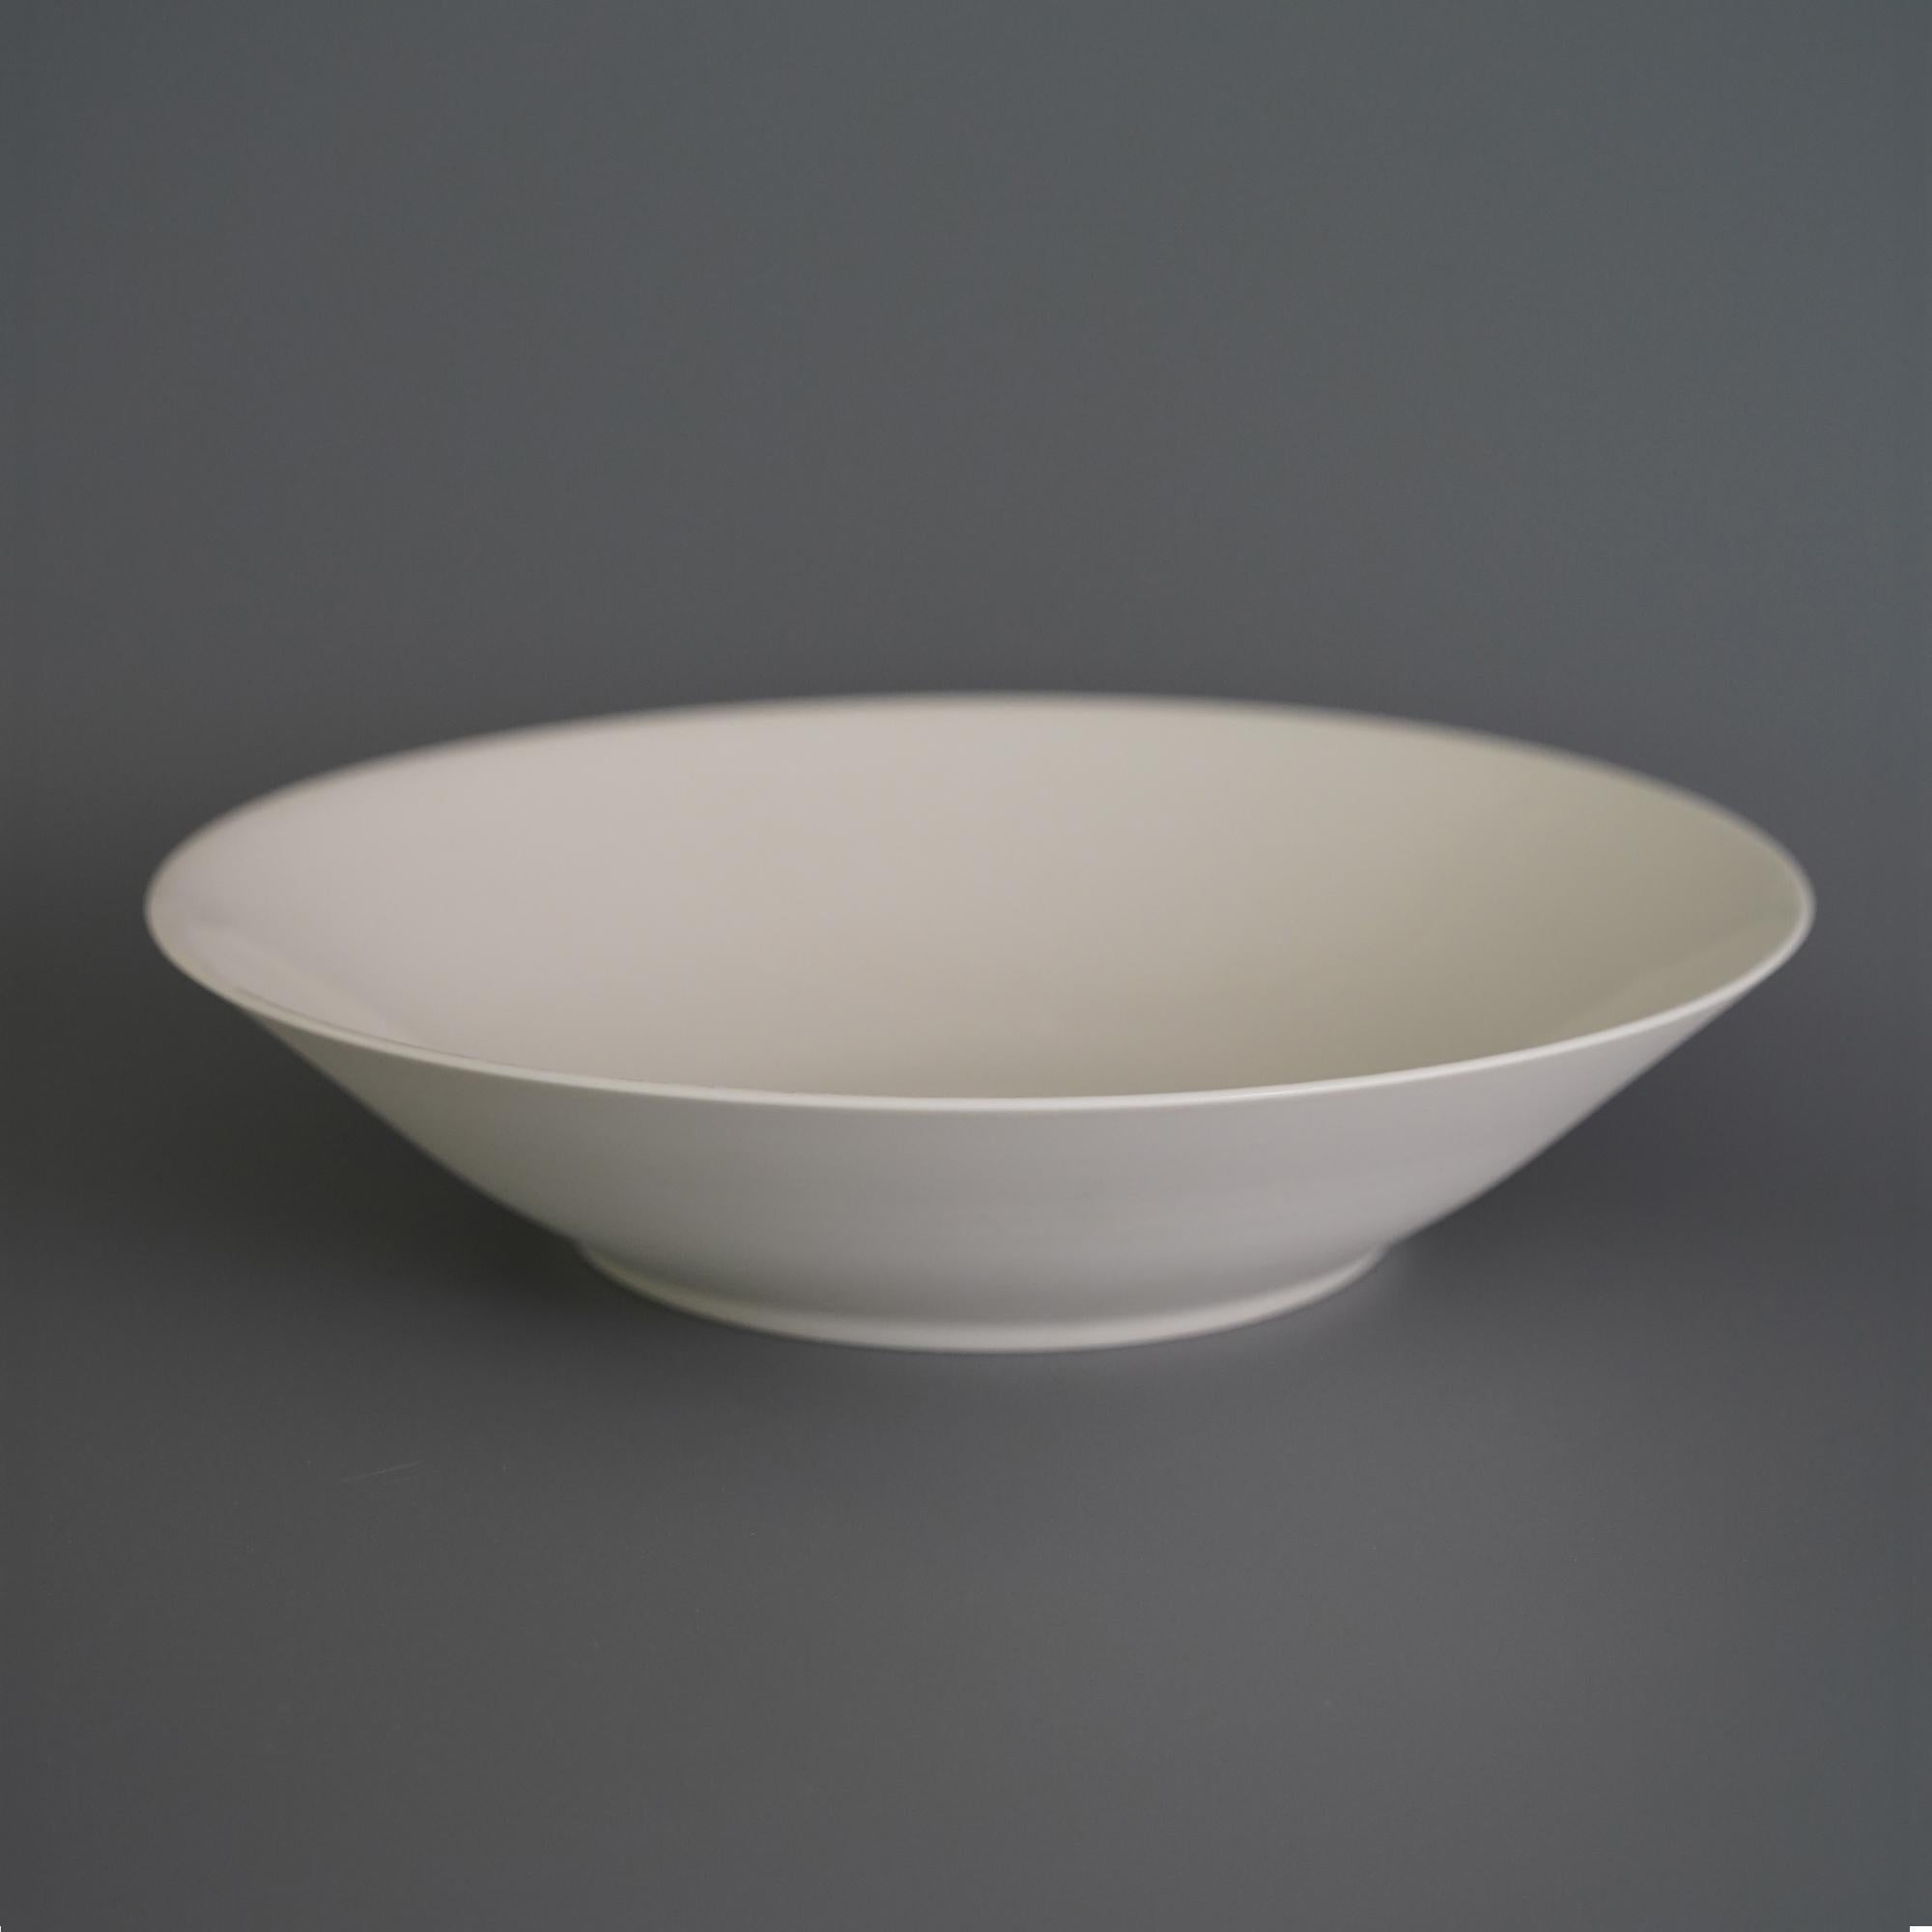 Set of 2 plain fruit bowls by Studio Cúze.
Dimensions: W 29 x H 6.5 cm.
Materials: ceramic.

A unique bowl that brightens up your room and knows how to present your fruit in an inimitable way. The bowl is completely white and comes with a baby